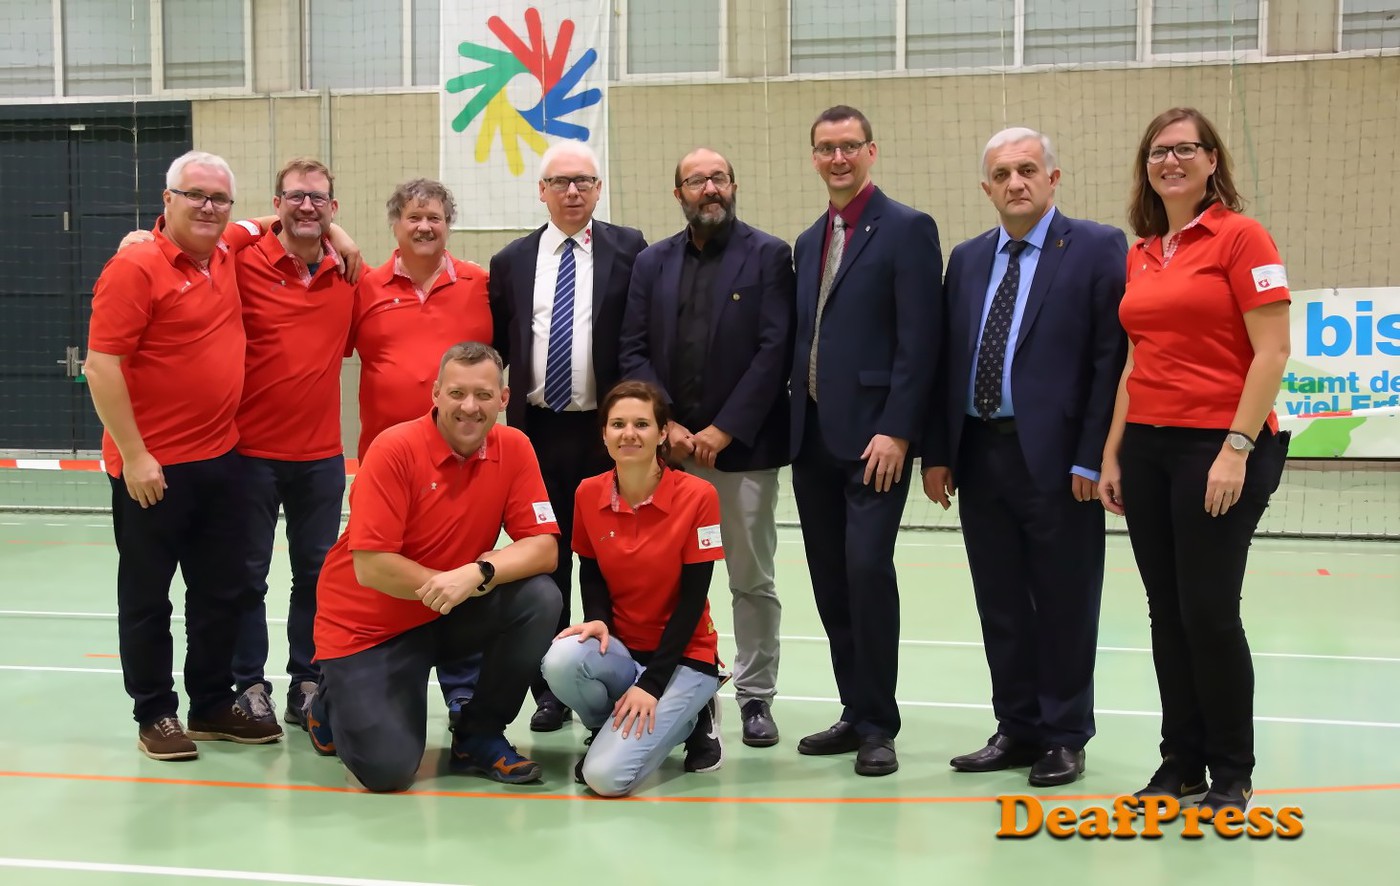 4TH WORLD DEAF FUTSAL CHAMPIONSHIPS 2019. THE OPENING CEREMONY